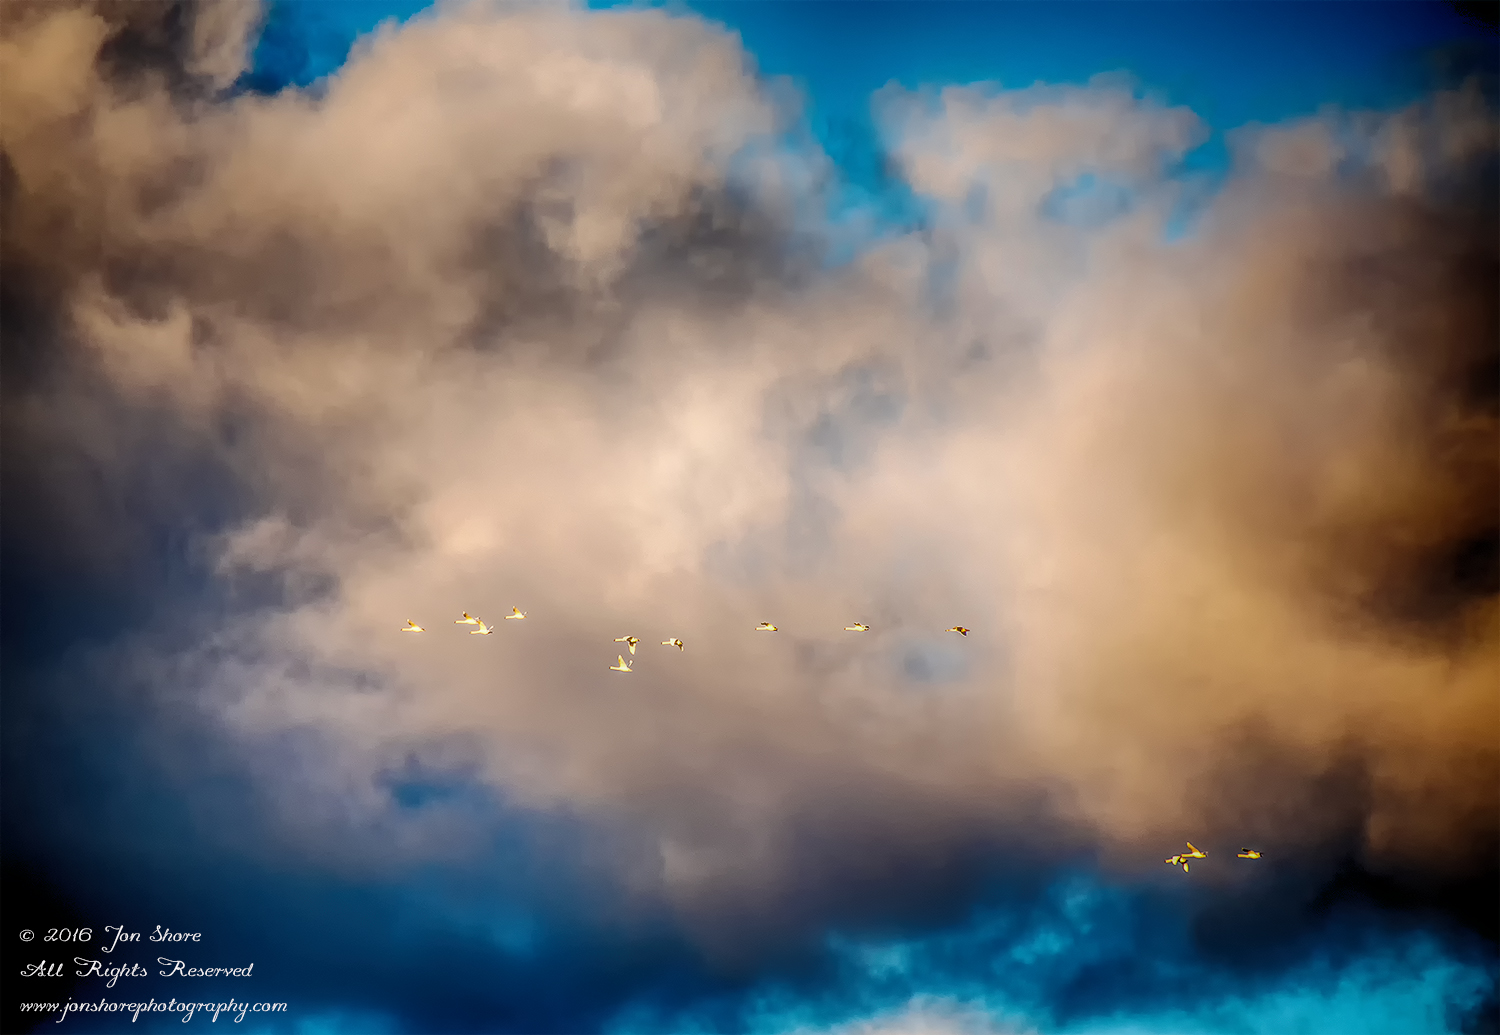 Swans flying in a stormy cloudscape. Nikkor 300mm